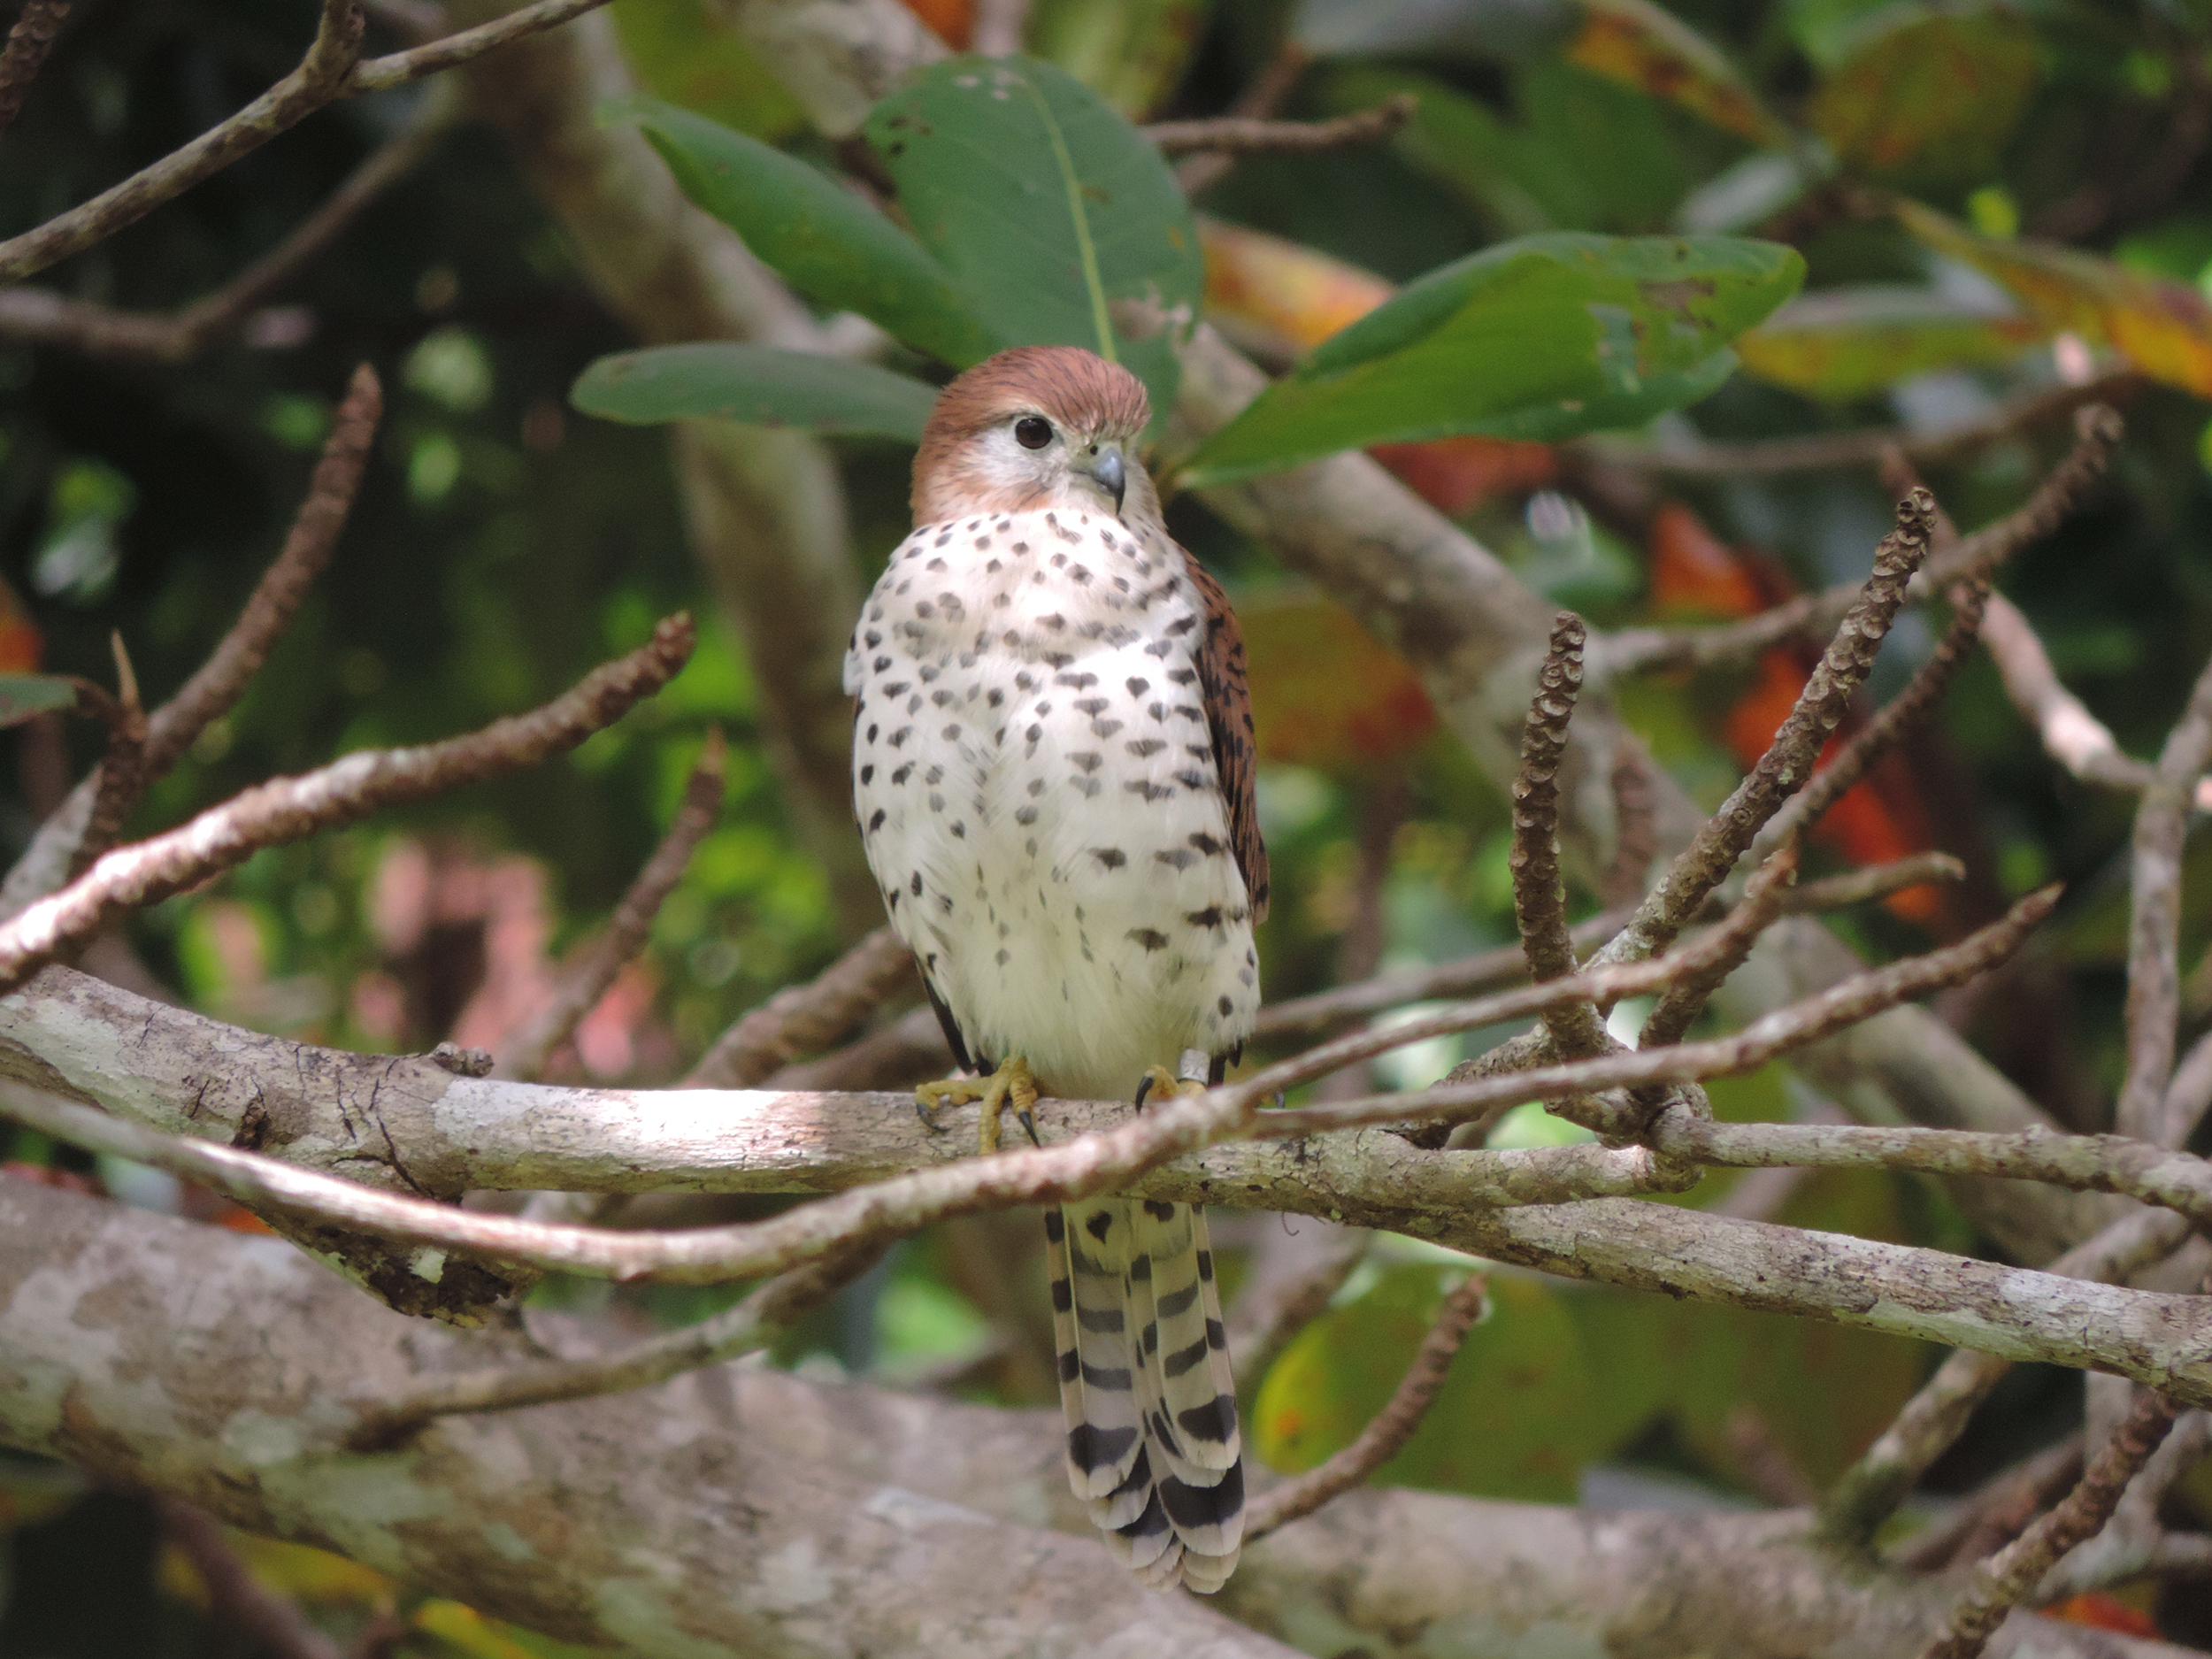 A Mauritius kestrel sits on a branch in a lush forest